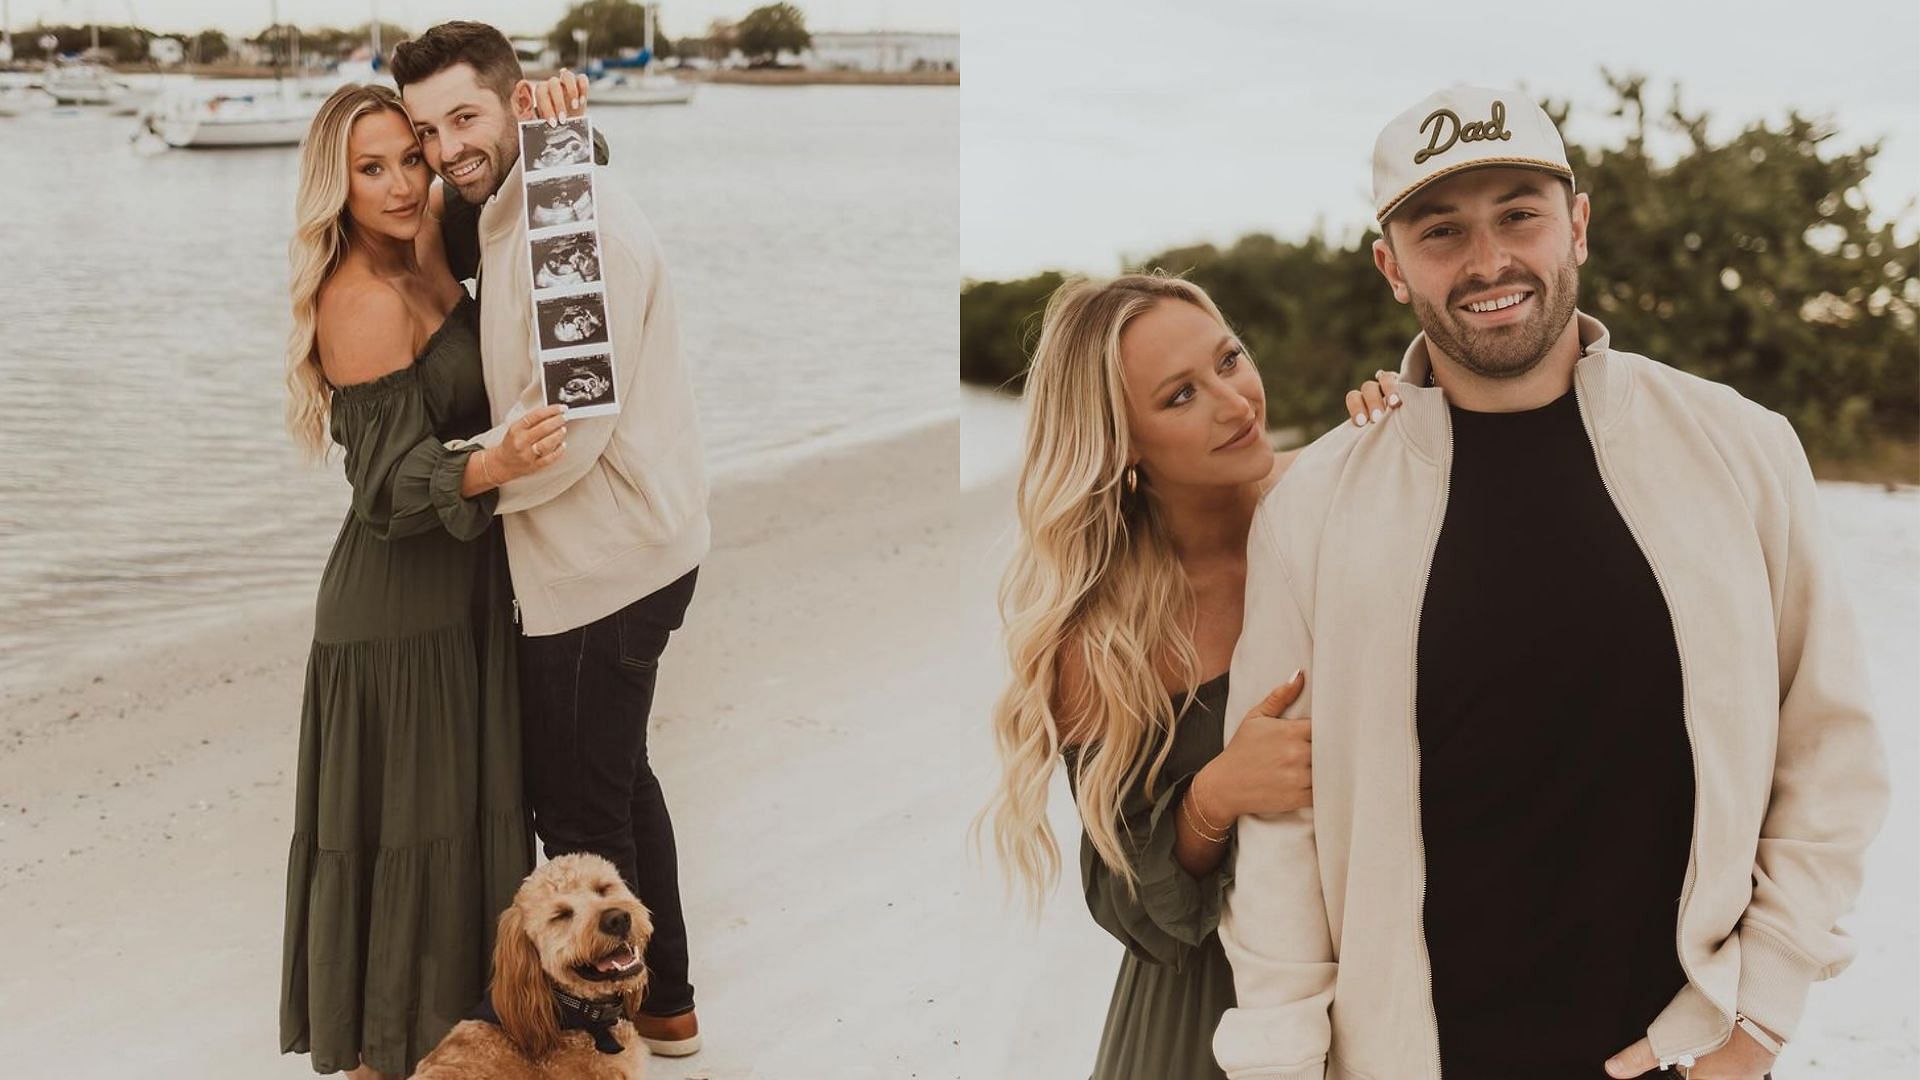 Emily and Baker Mayfield are expecting a baby girl. (Image credit: Emily Mayfield on Instagram)